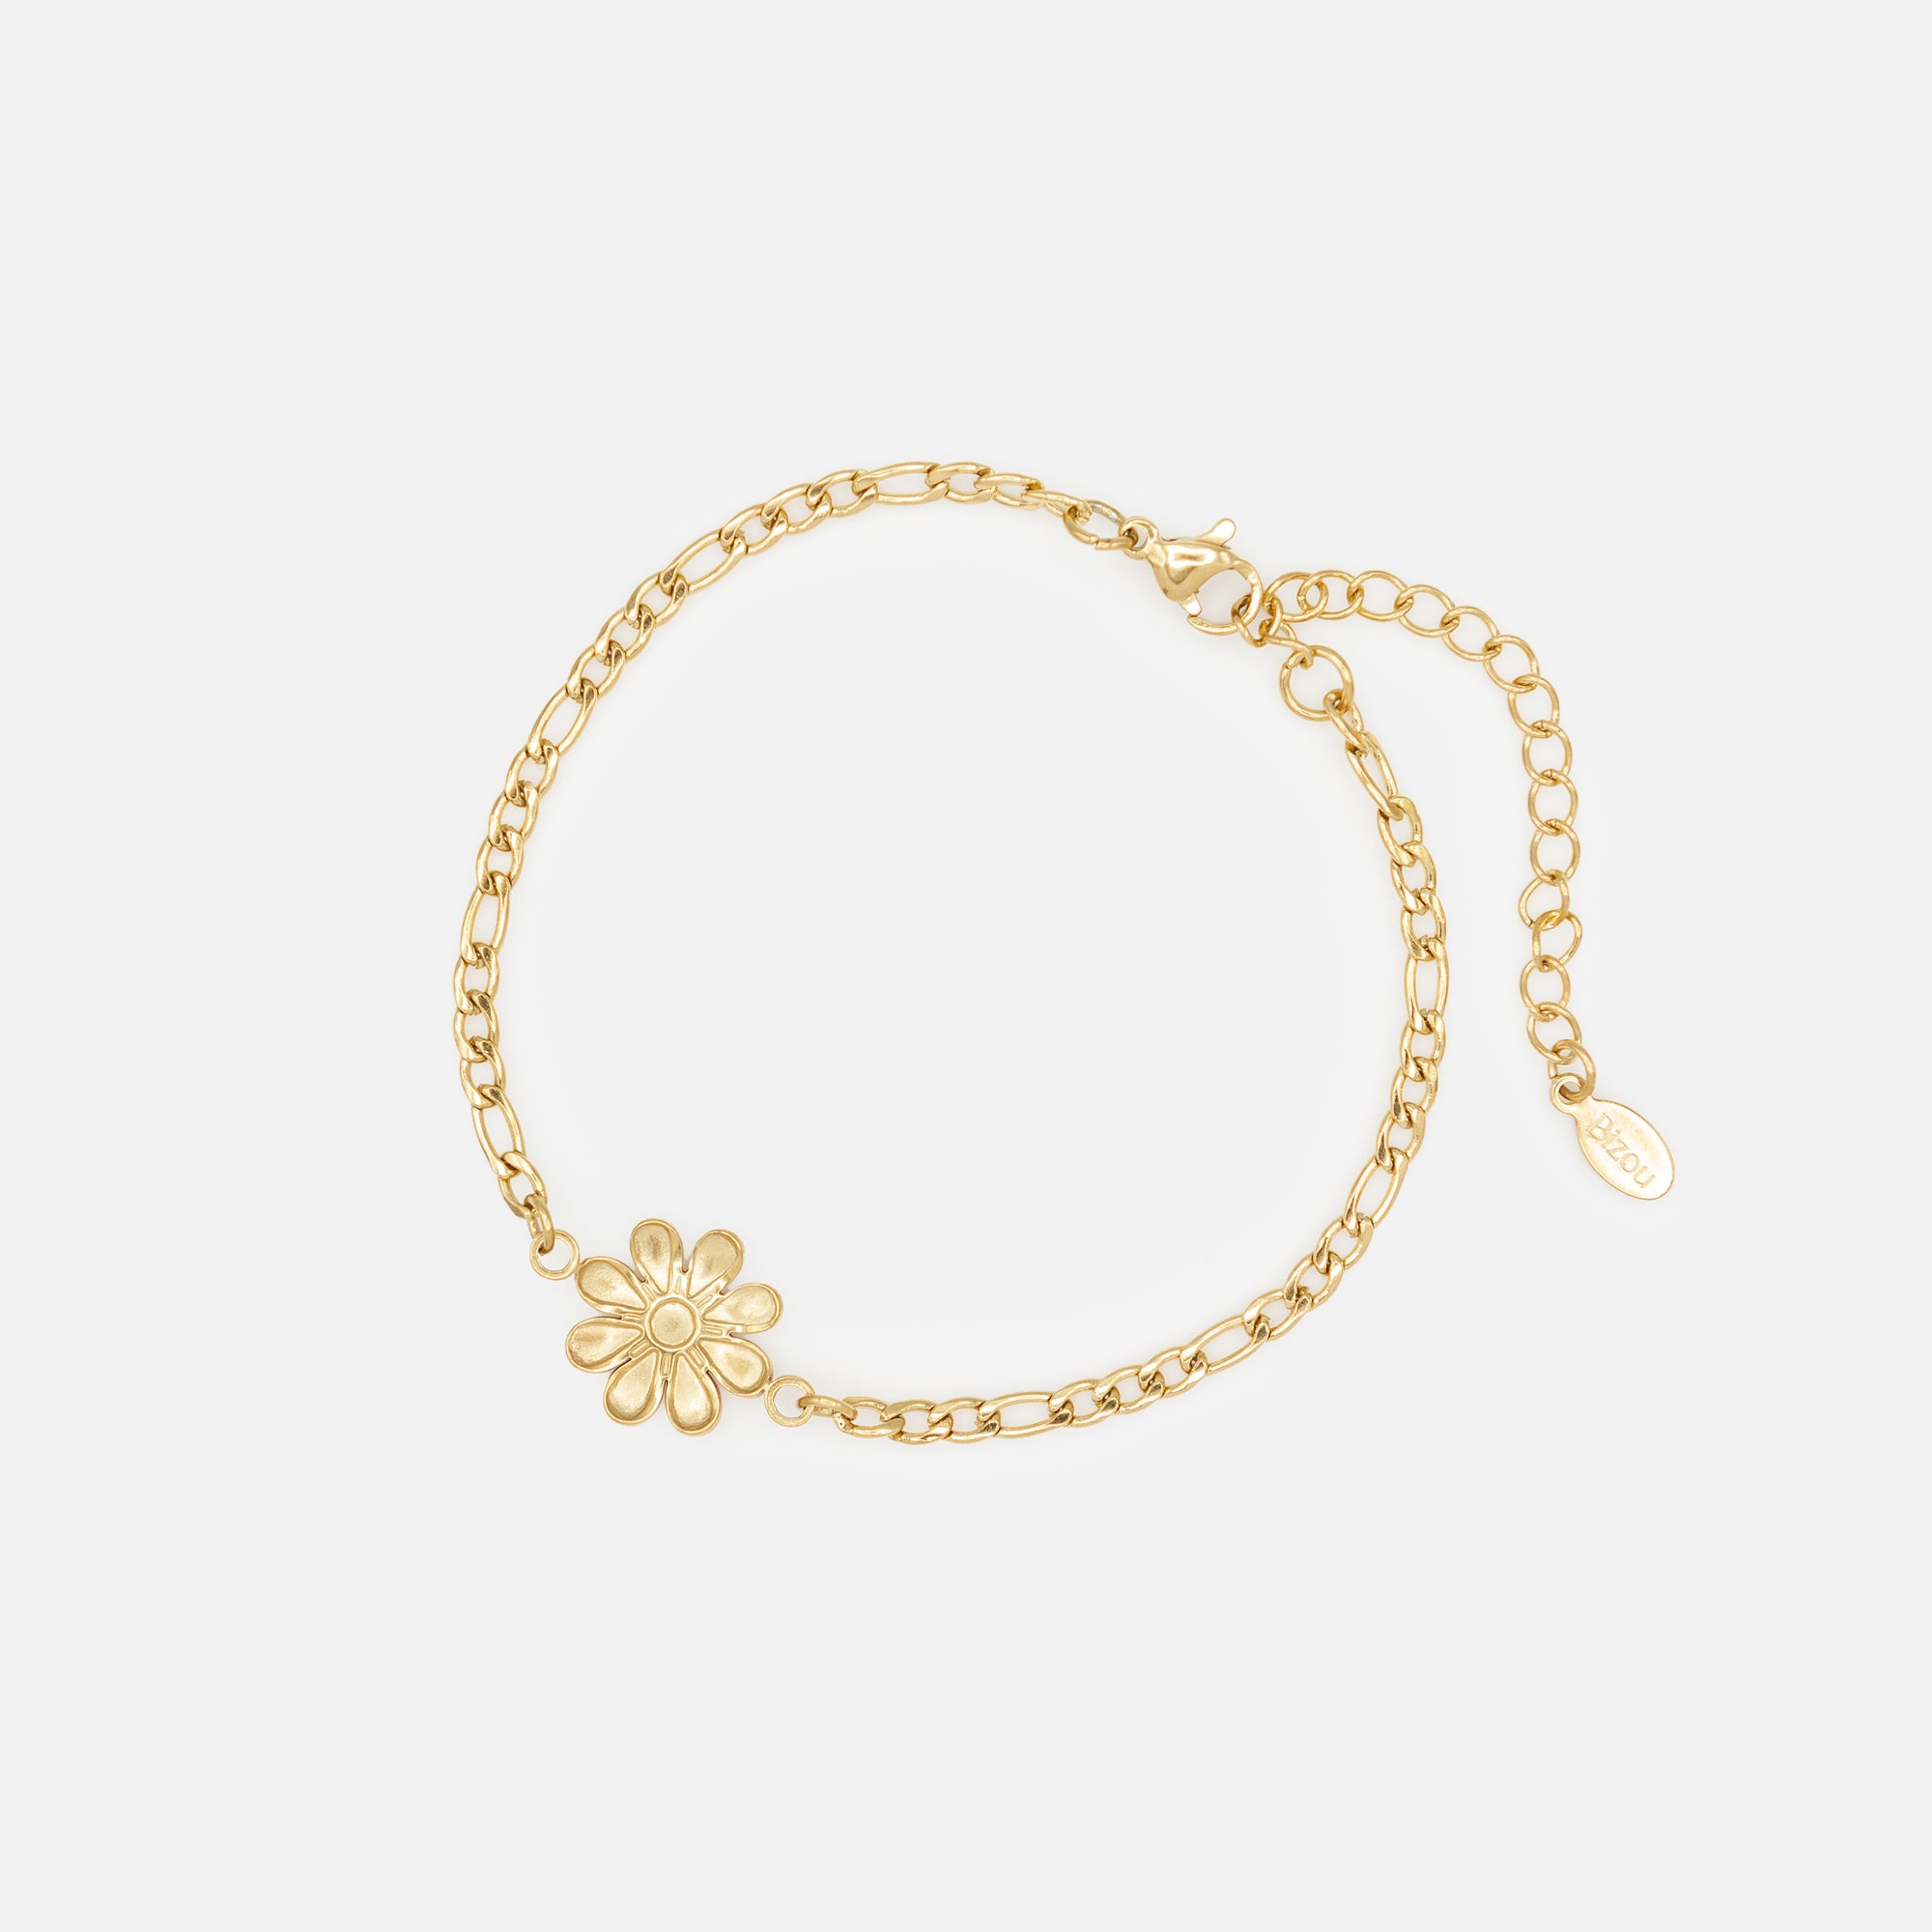 Set of three gold bracelets with pretty stainless steel flower